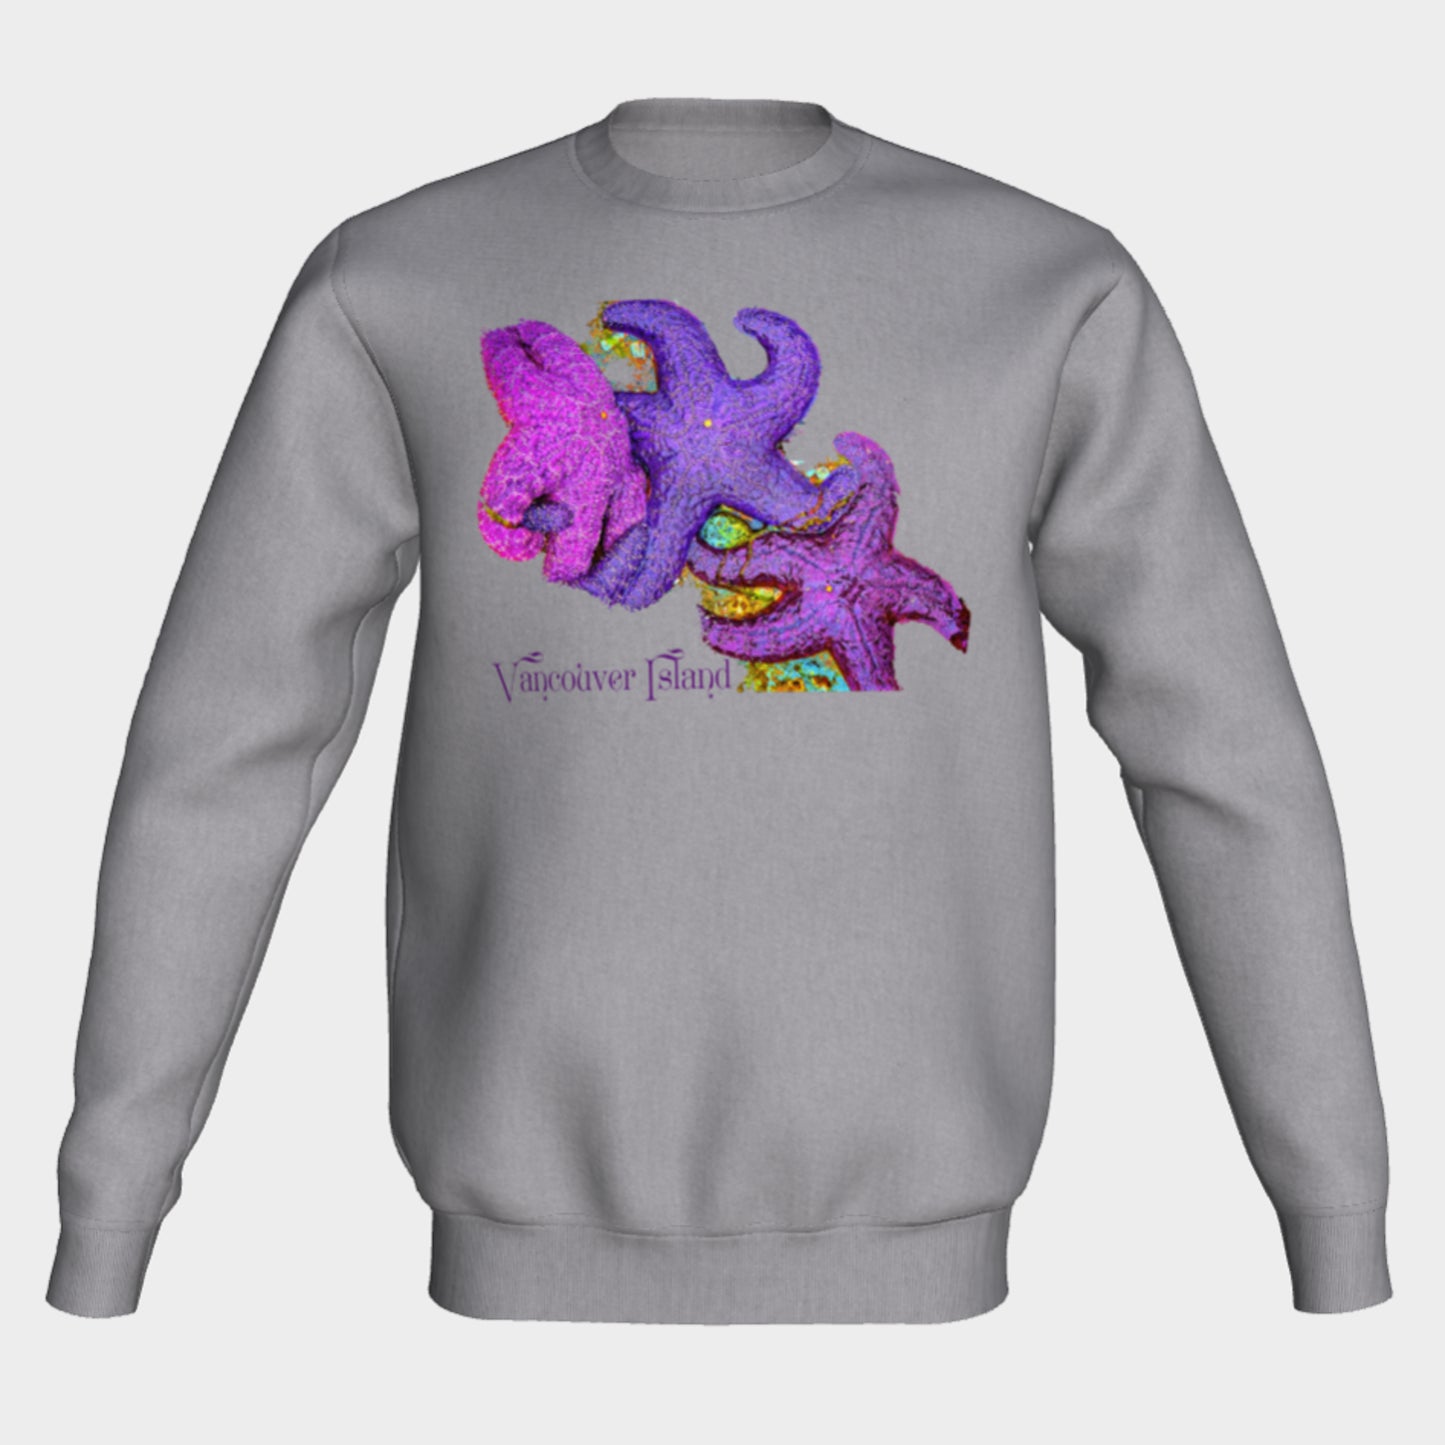 Starfish Cluster Vancouver Island Crewneck Sweatshirt What’s better than a super cozy sweatshirt? A super cozy sweatshirt from Van Isle Goddess!  Super cozy unisex sweatshirt for those chilly days.  Excellent for men or women.   Fit is roomy and comfortable. 